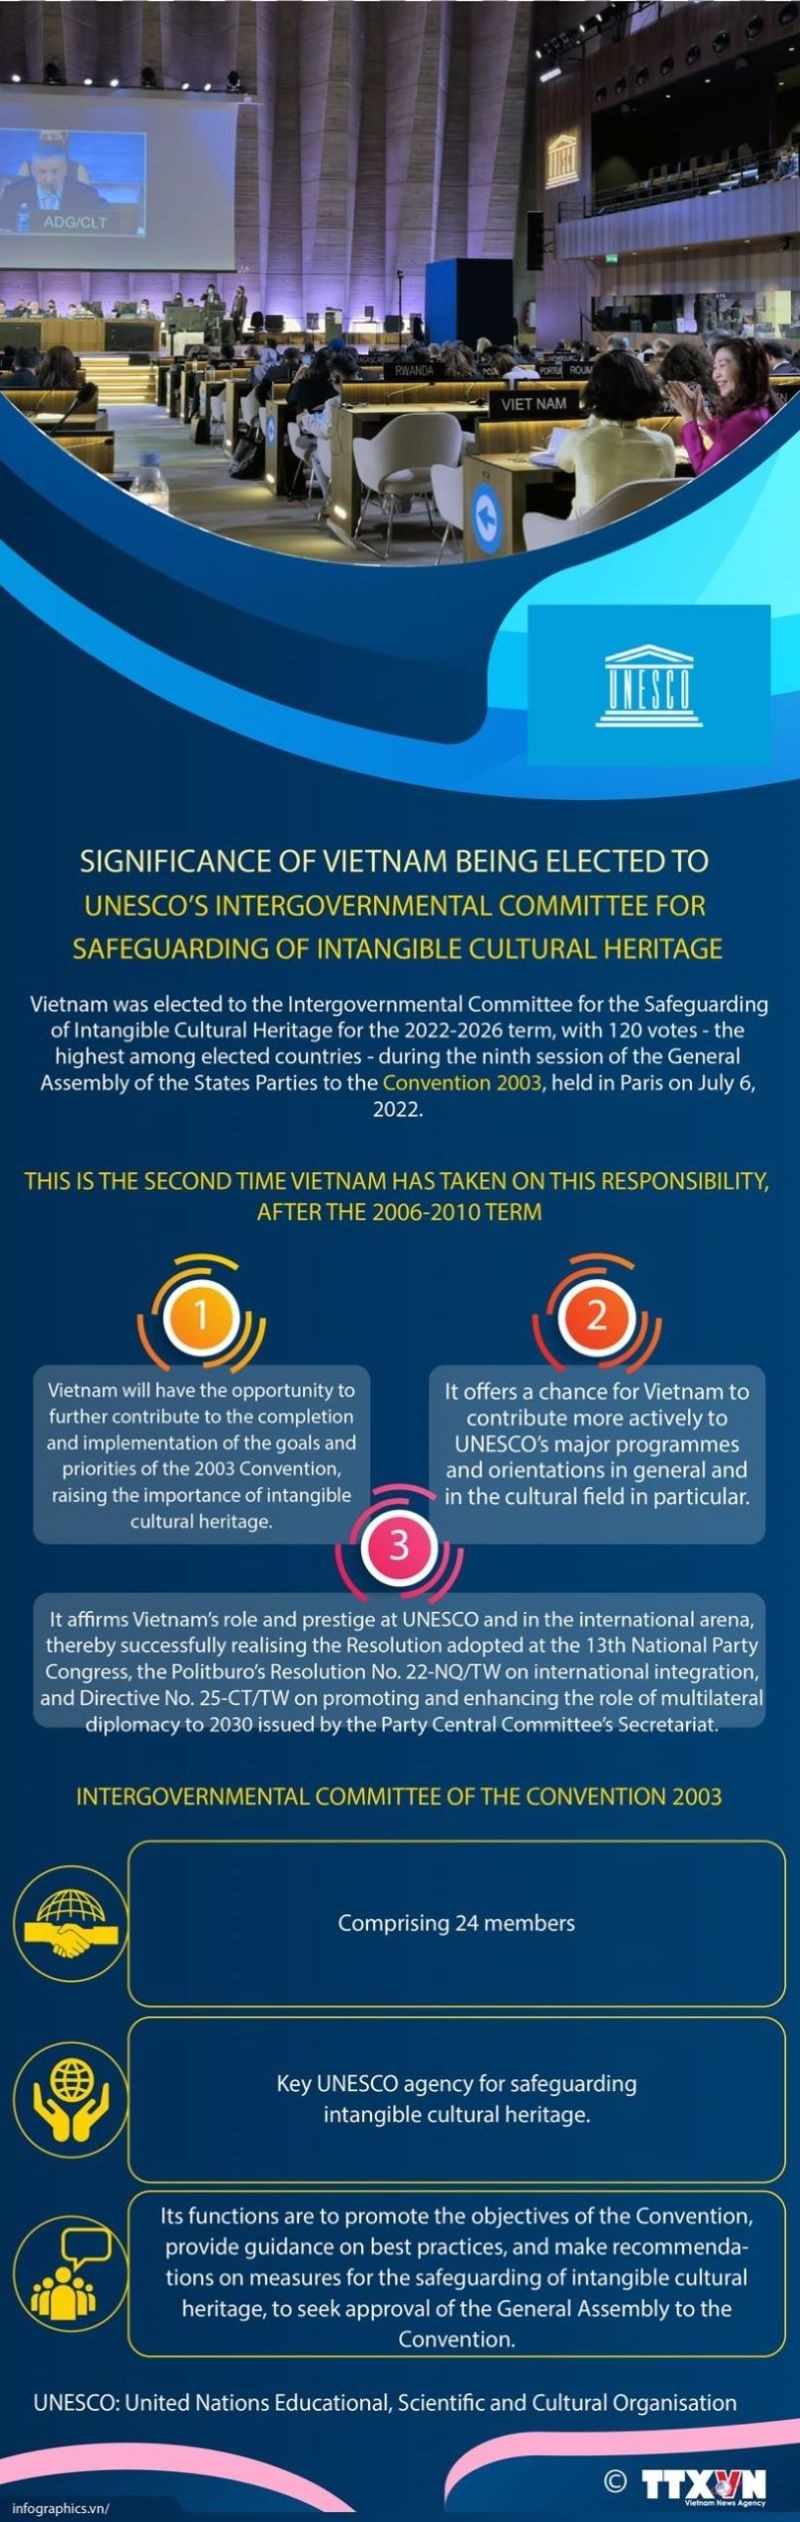 Significance of Vietnam being elected to UNESCO intangible cultural heritage committee